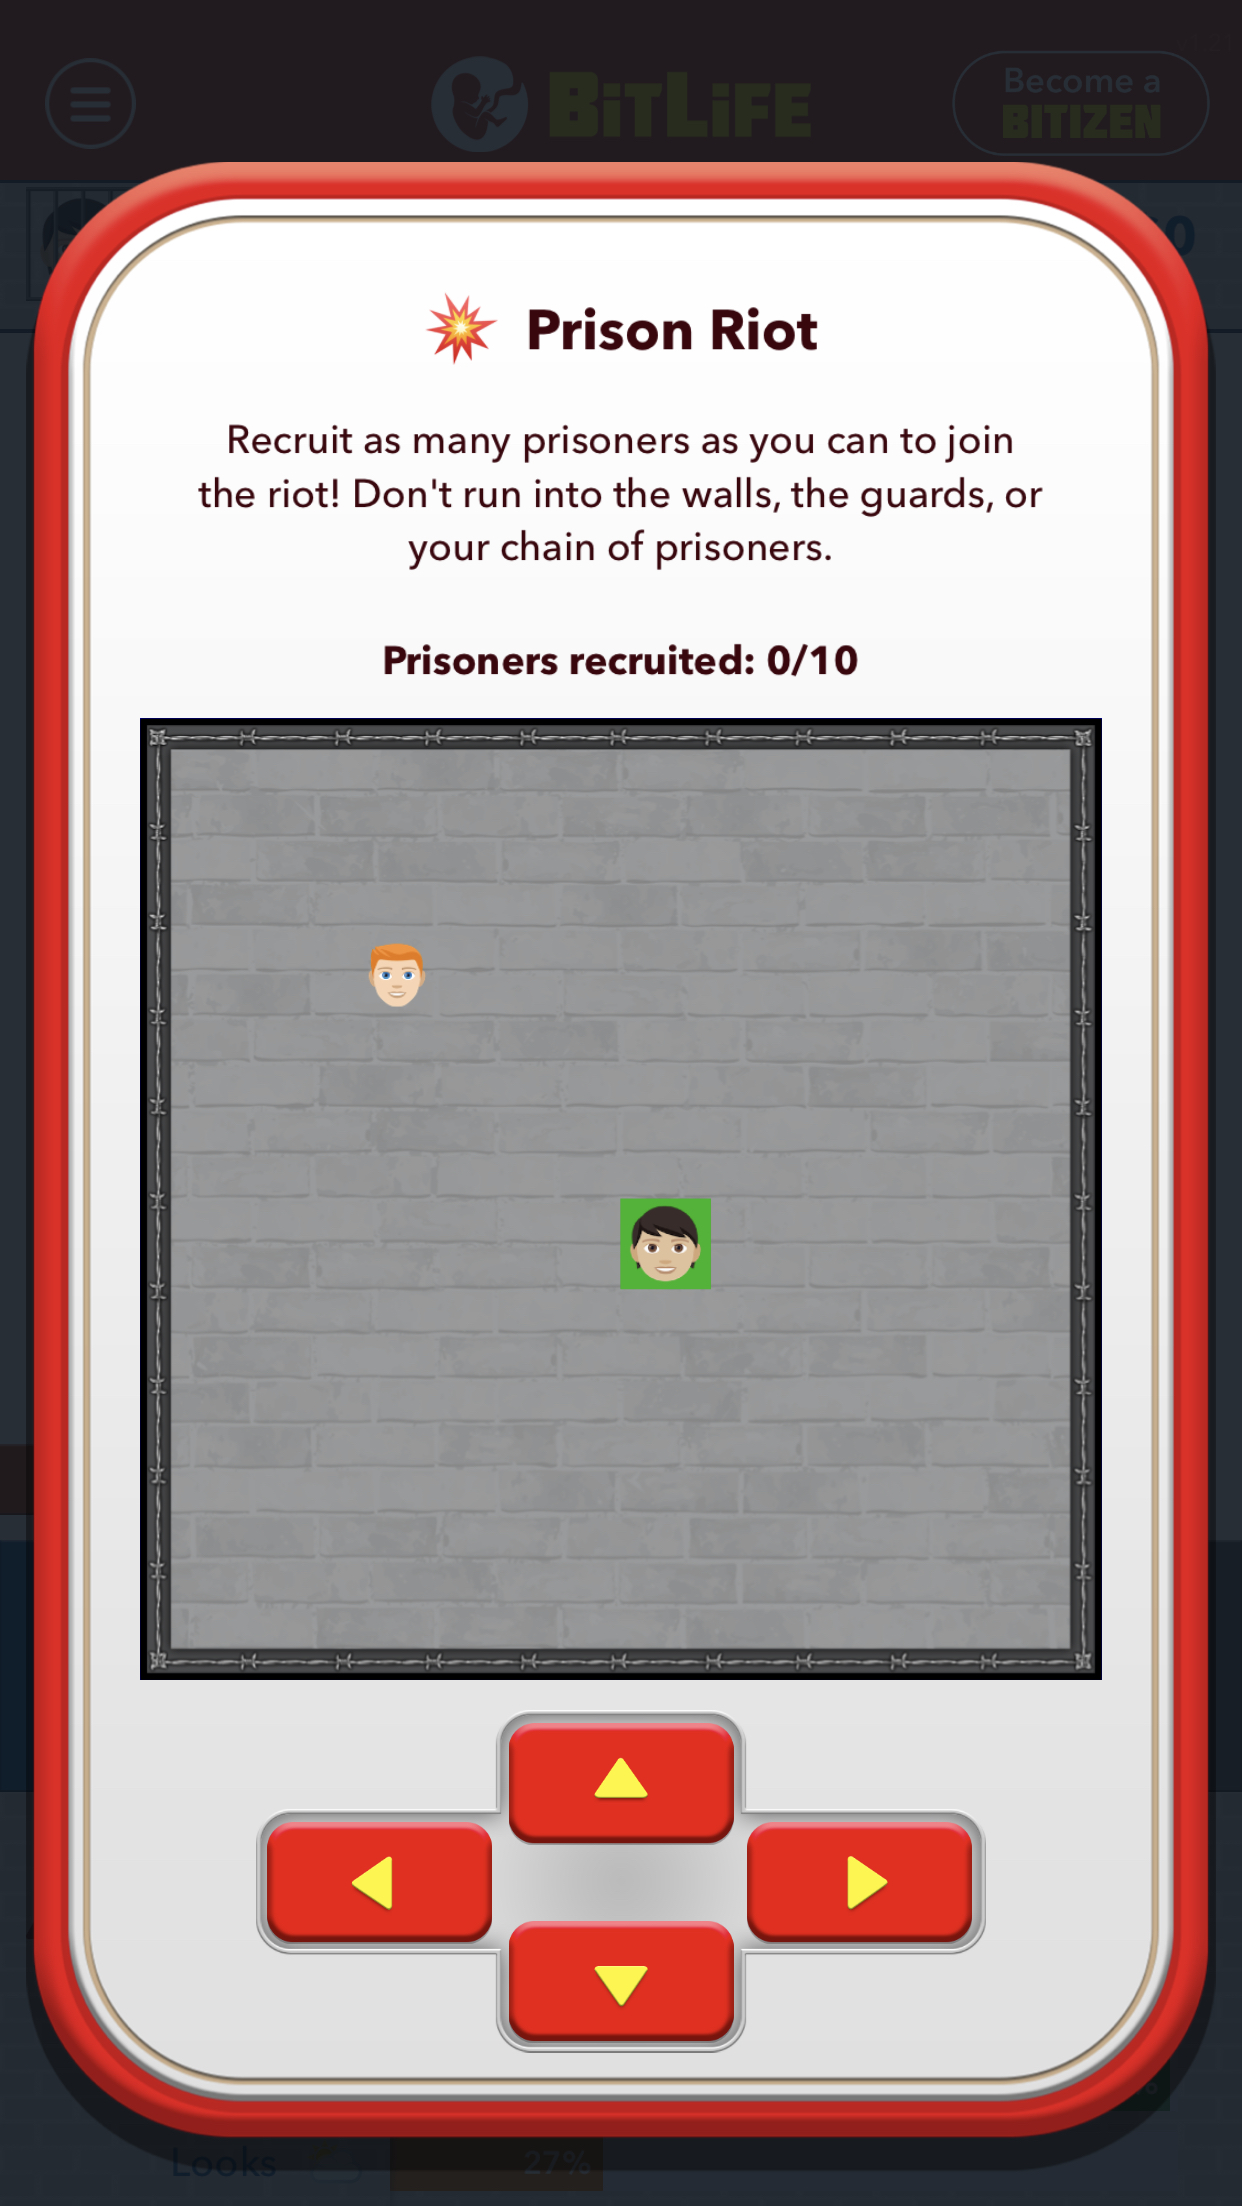 How to Escape Prison In BitLife – 2023 Guide in 2023